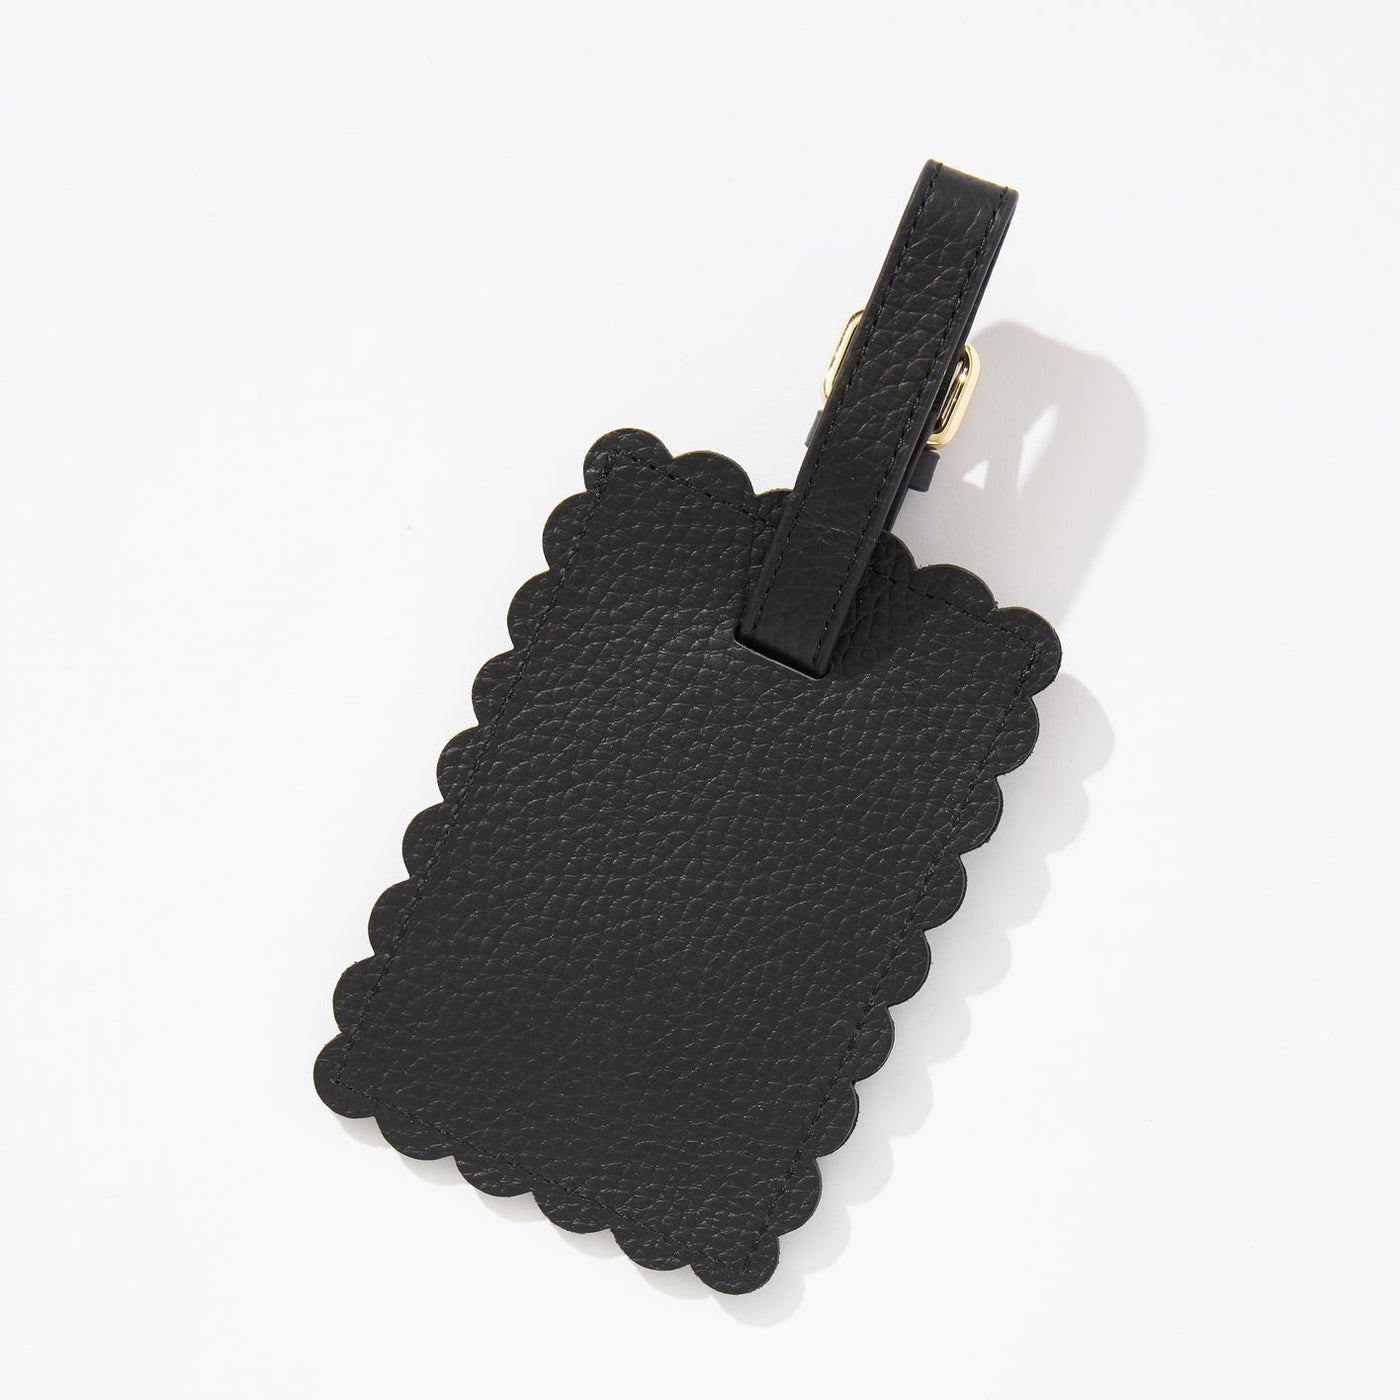 The Luggage Tag - Black Pebbled Leather